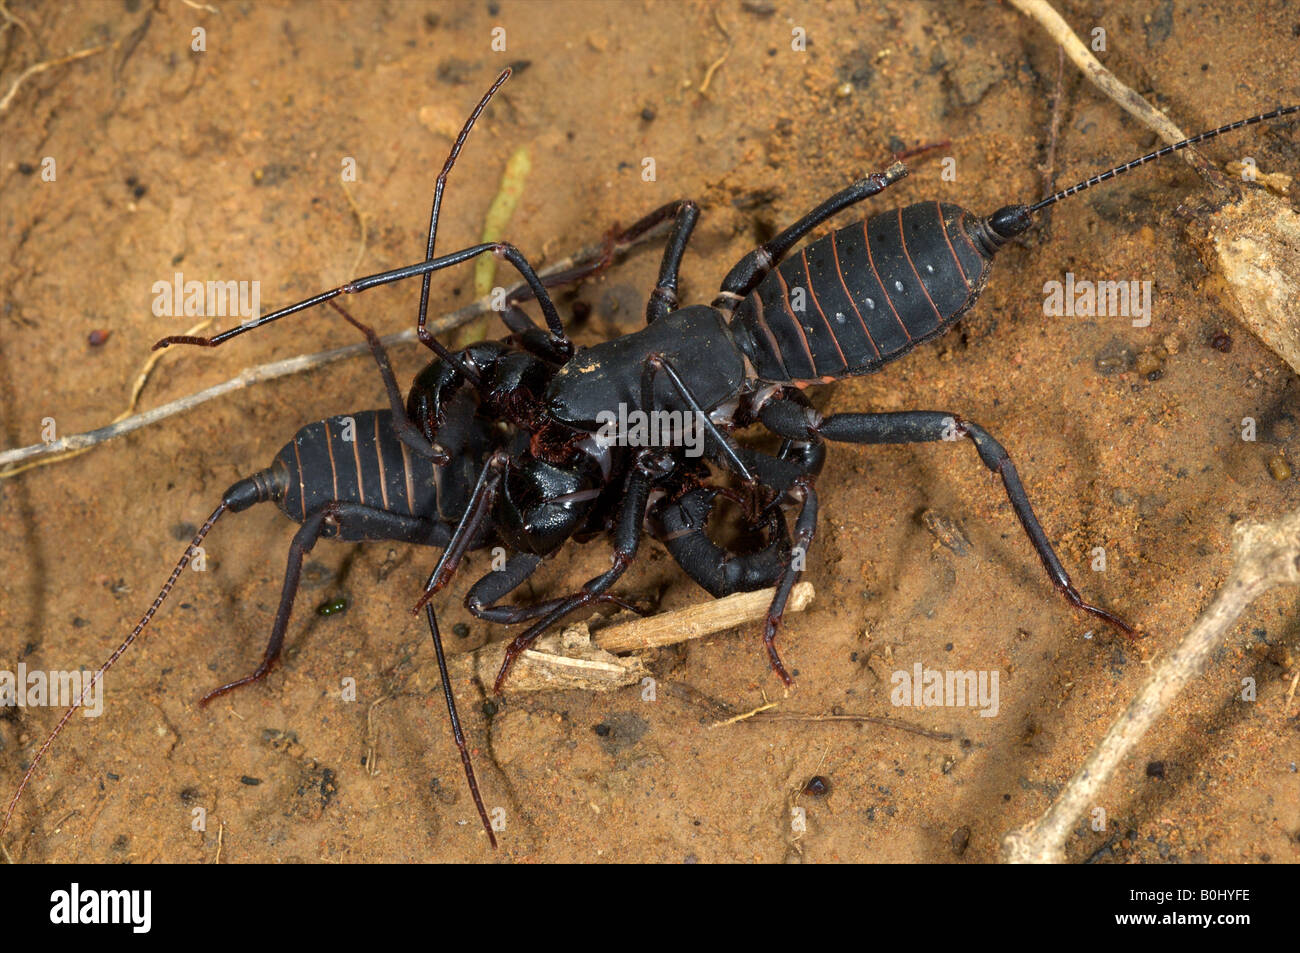 uropygid commonly known as a whip scorpion Stock Photo